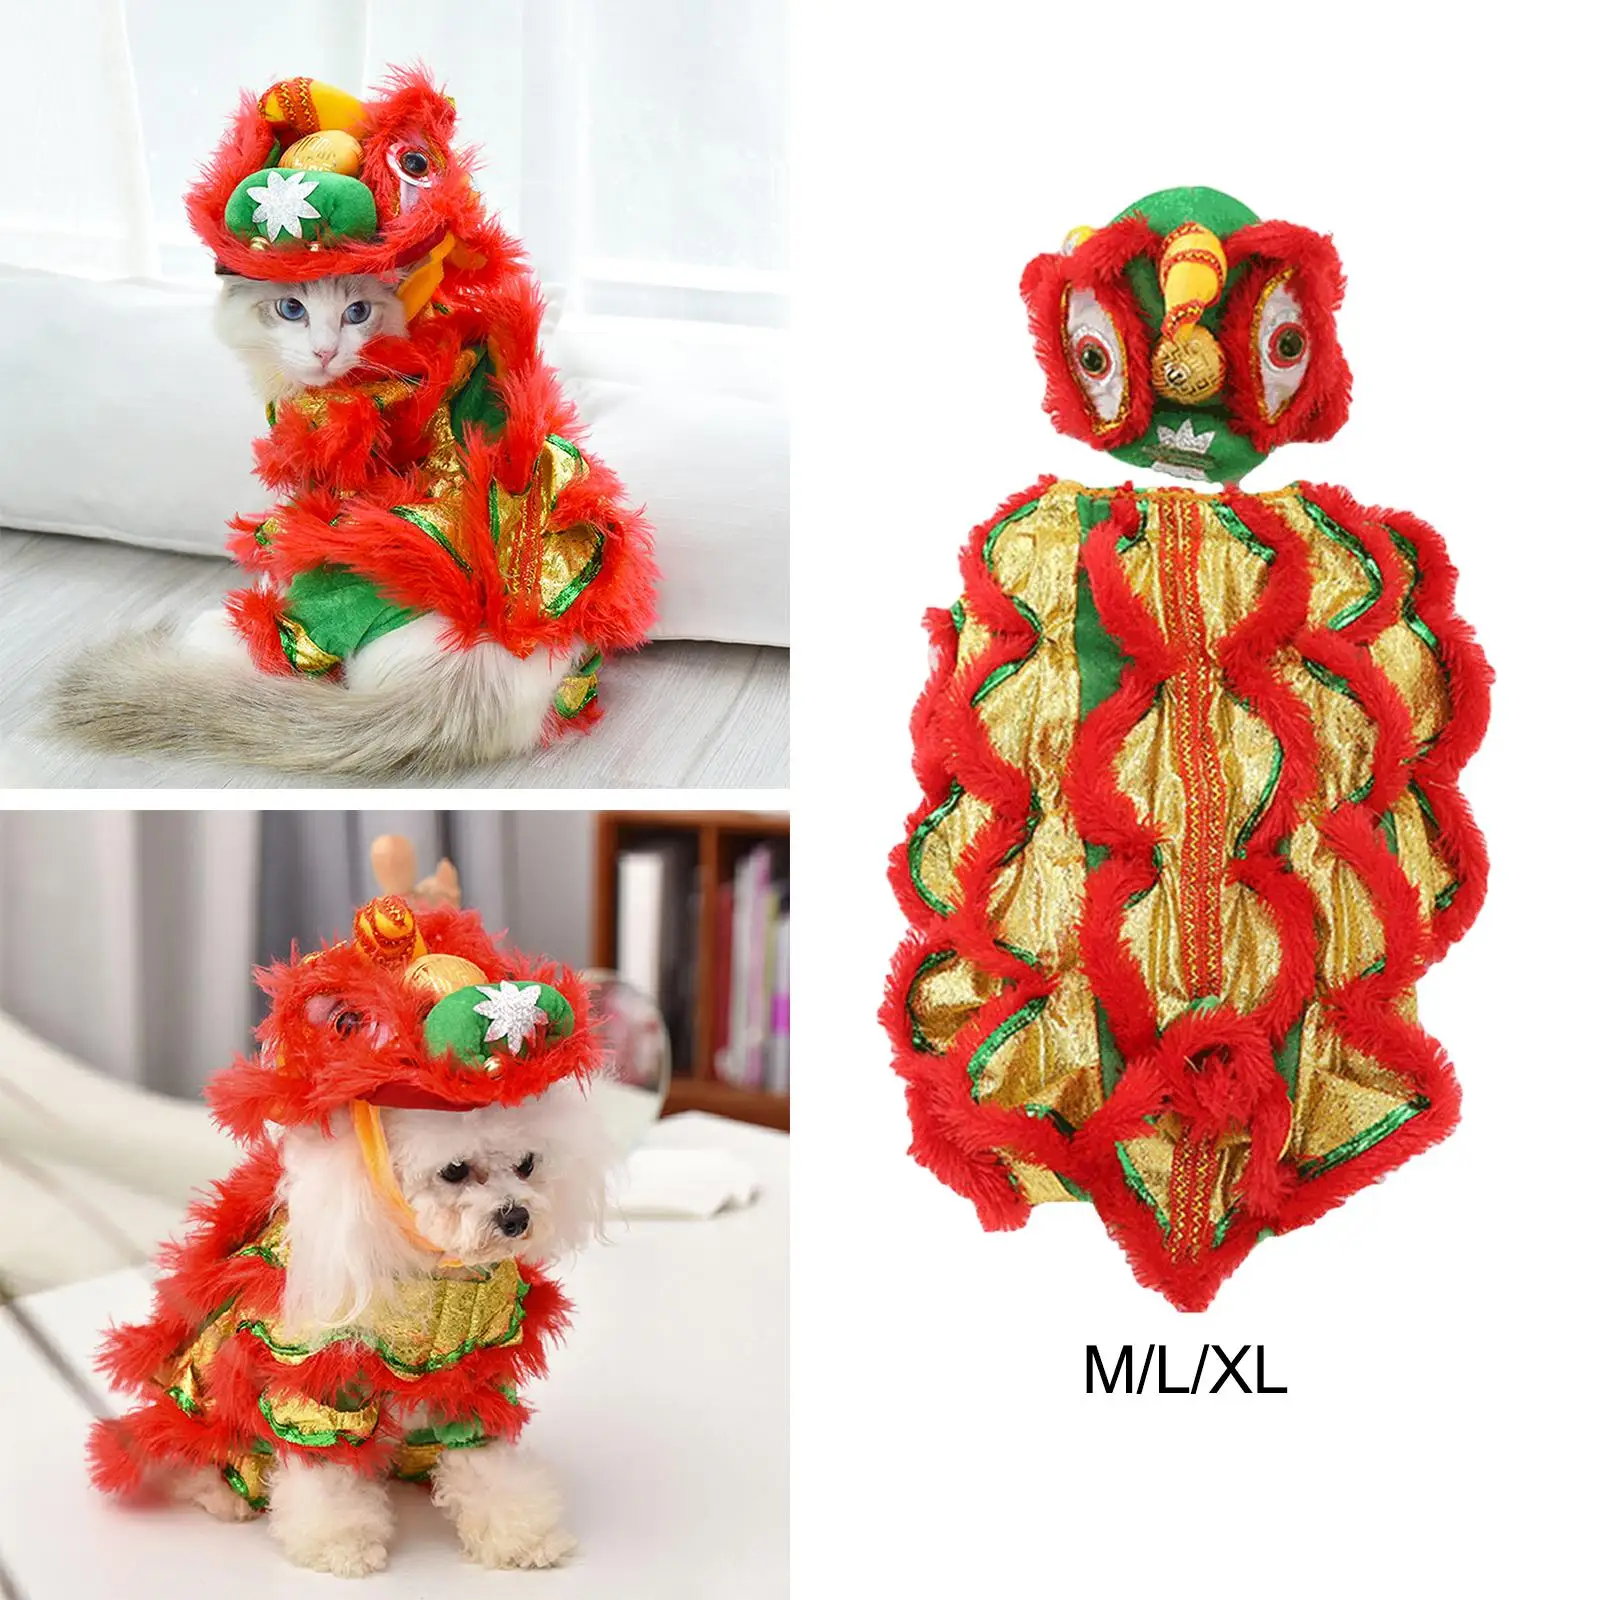 Winter Puppy Costume Cute Coat Jacket Lightweight Soft Chinese Spring Festival Hoodies Coat for Cosplay Stage Performance Party